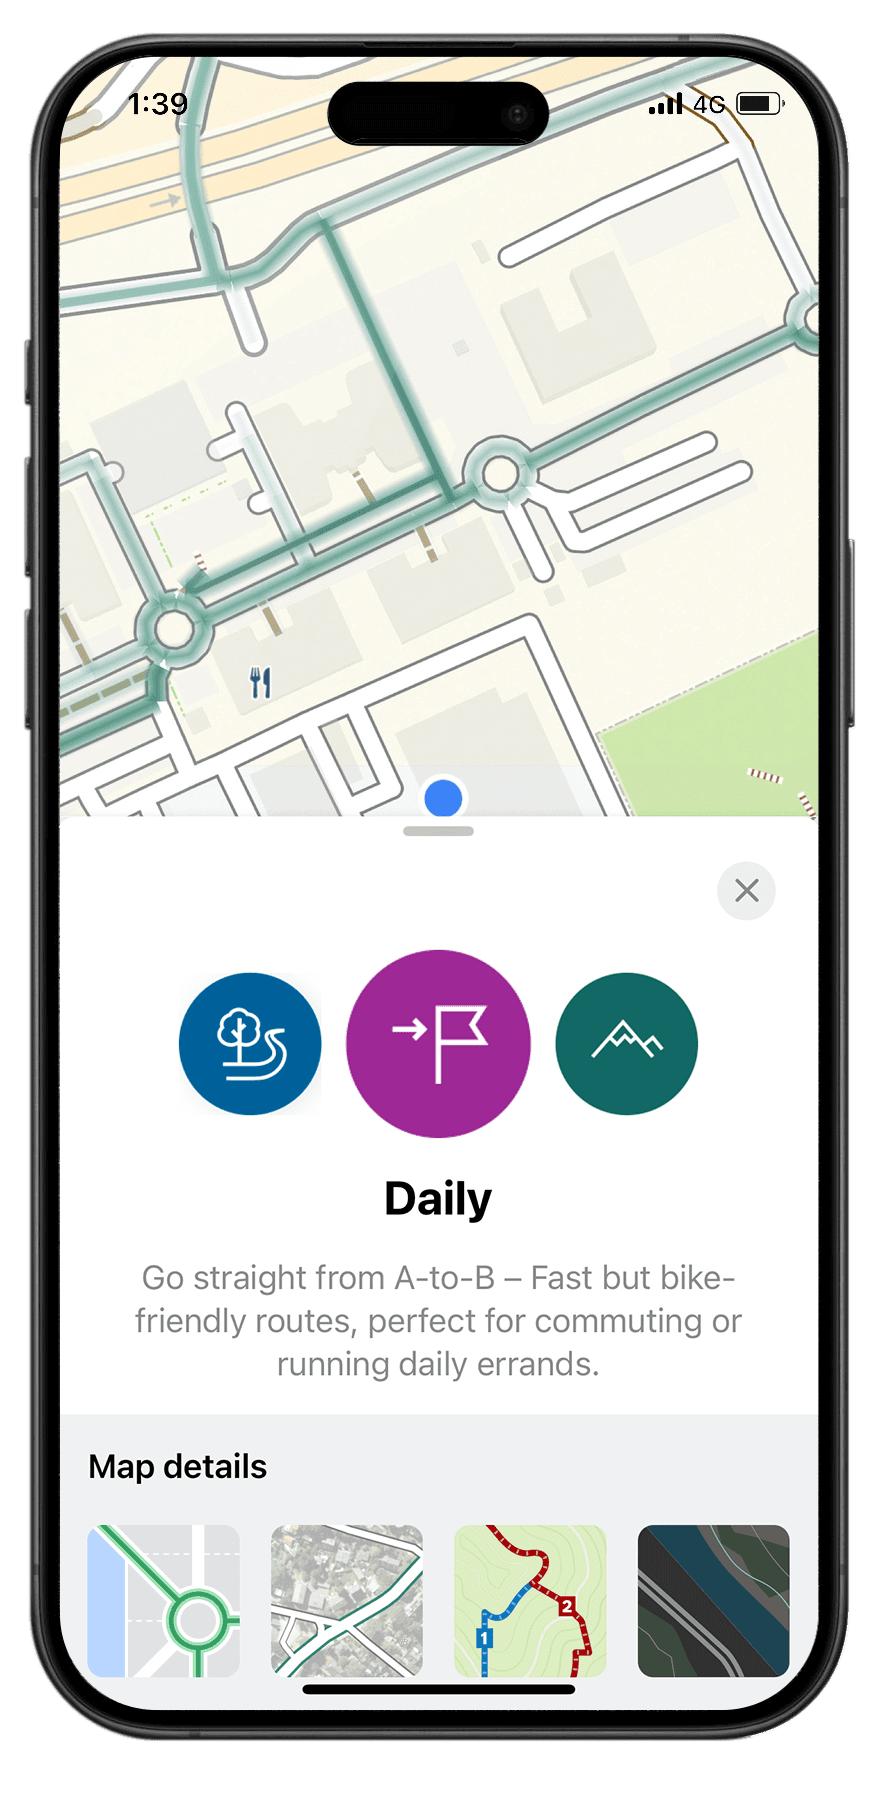 Route planning screen of Eflow app